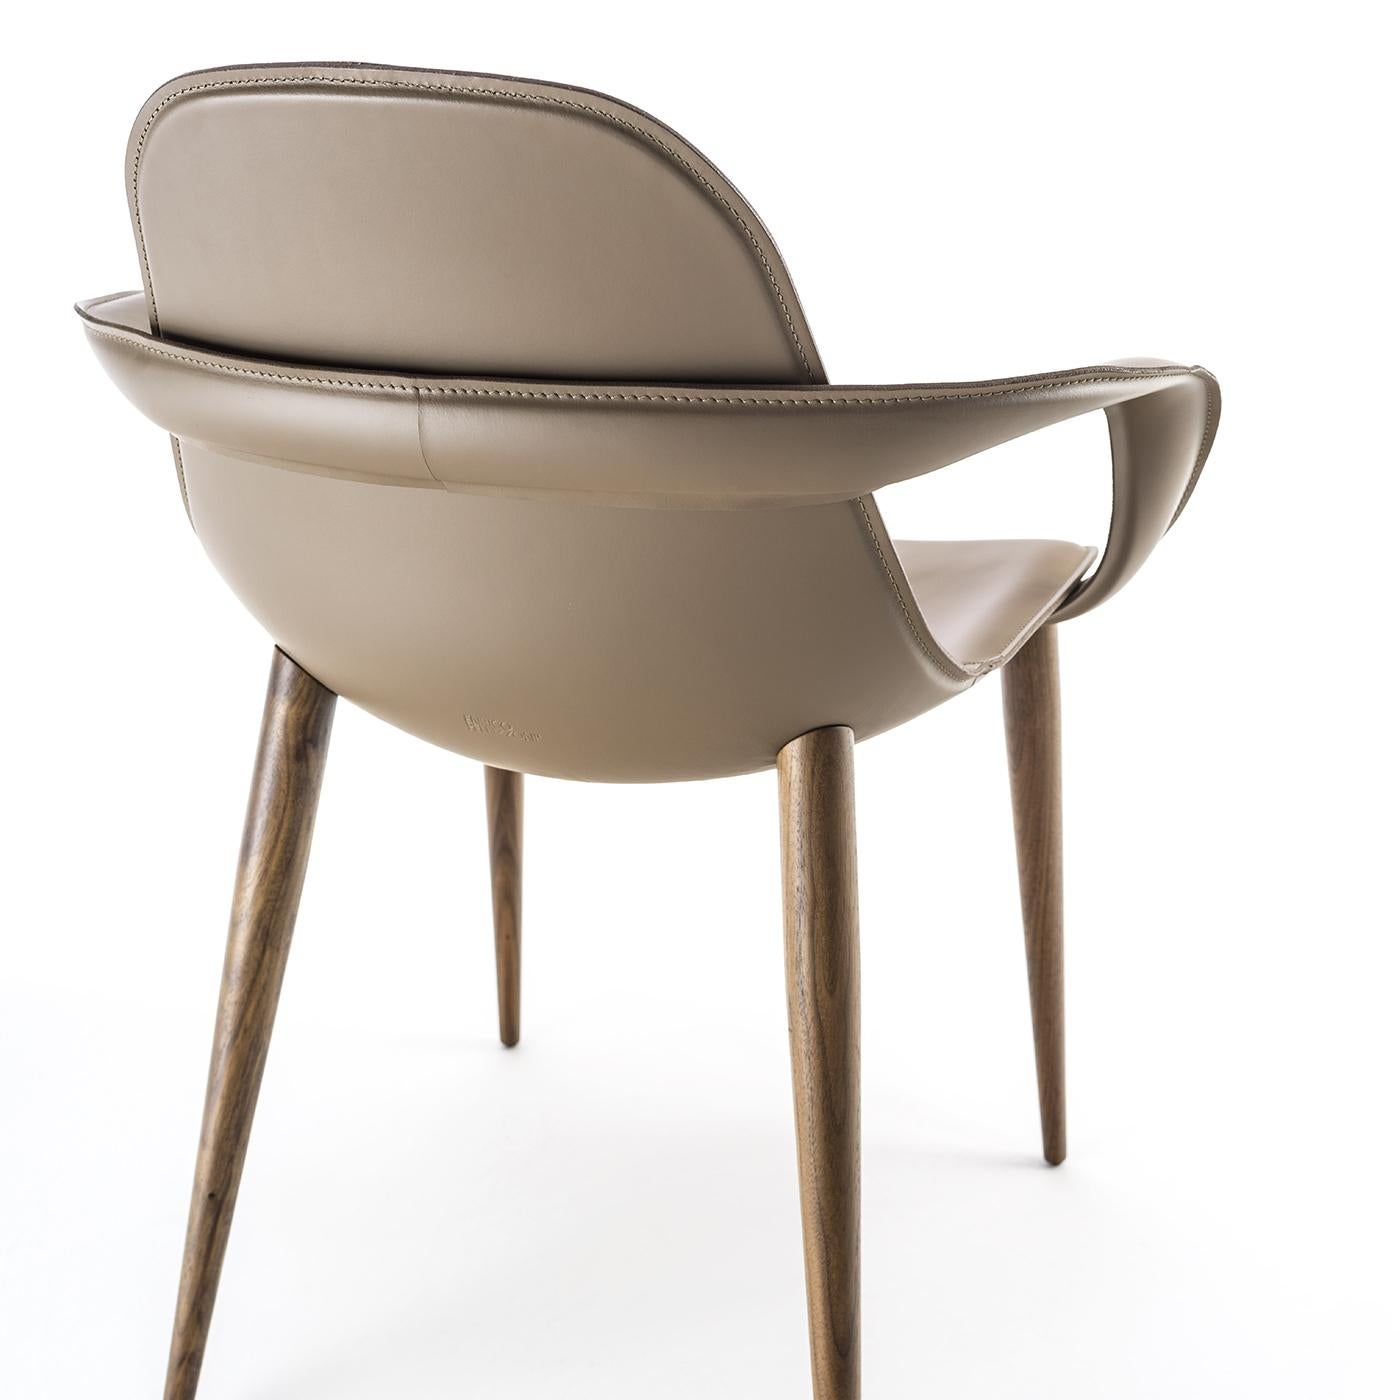 This chair was designed to fit perfectly into any space. The seat's shape holds up the back, ensuring comfort, while four Canaletto-walnut legs support the structure. The shell is in aluminum, covered in soft, taupe leather. Ribbon-shaped armrests